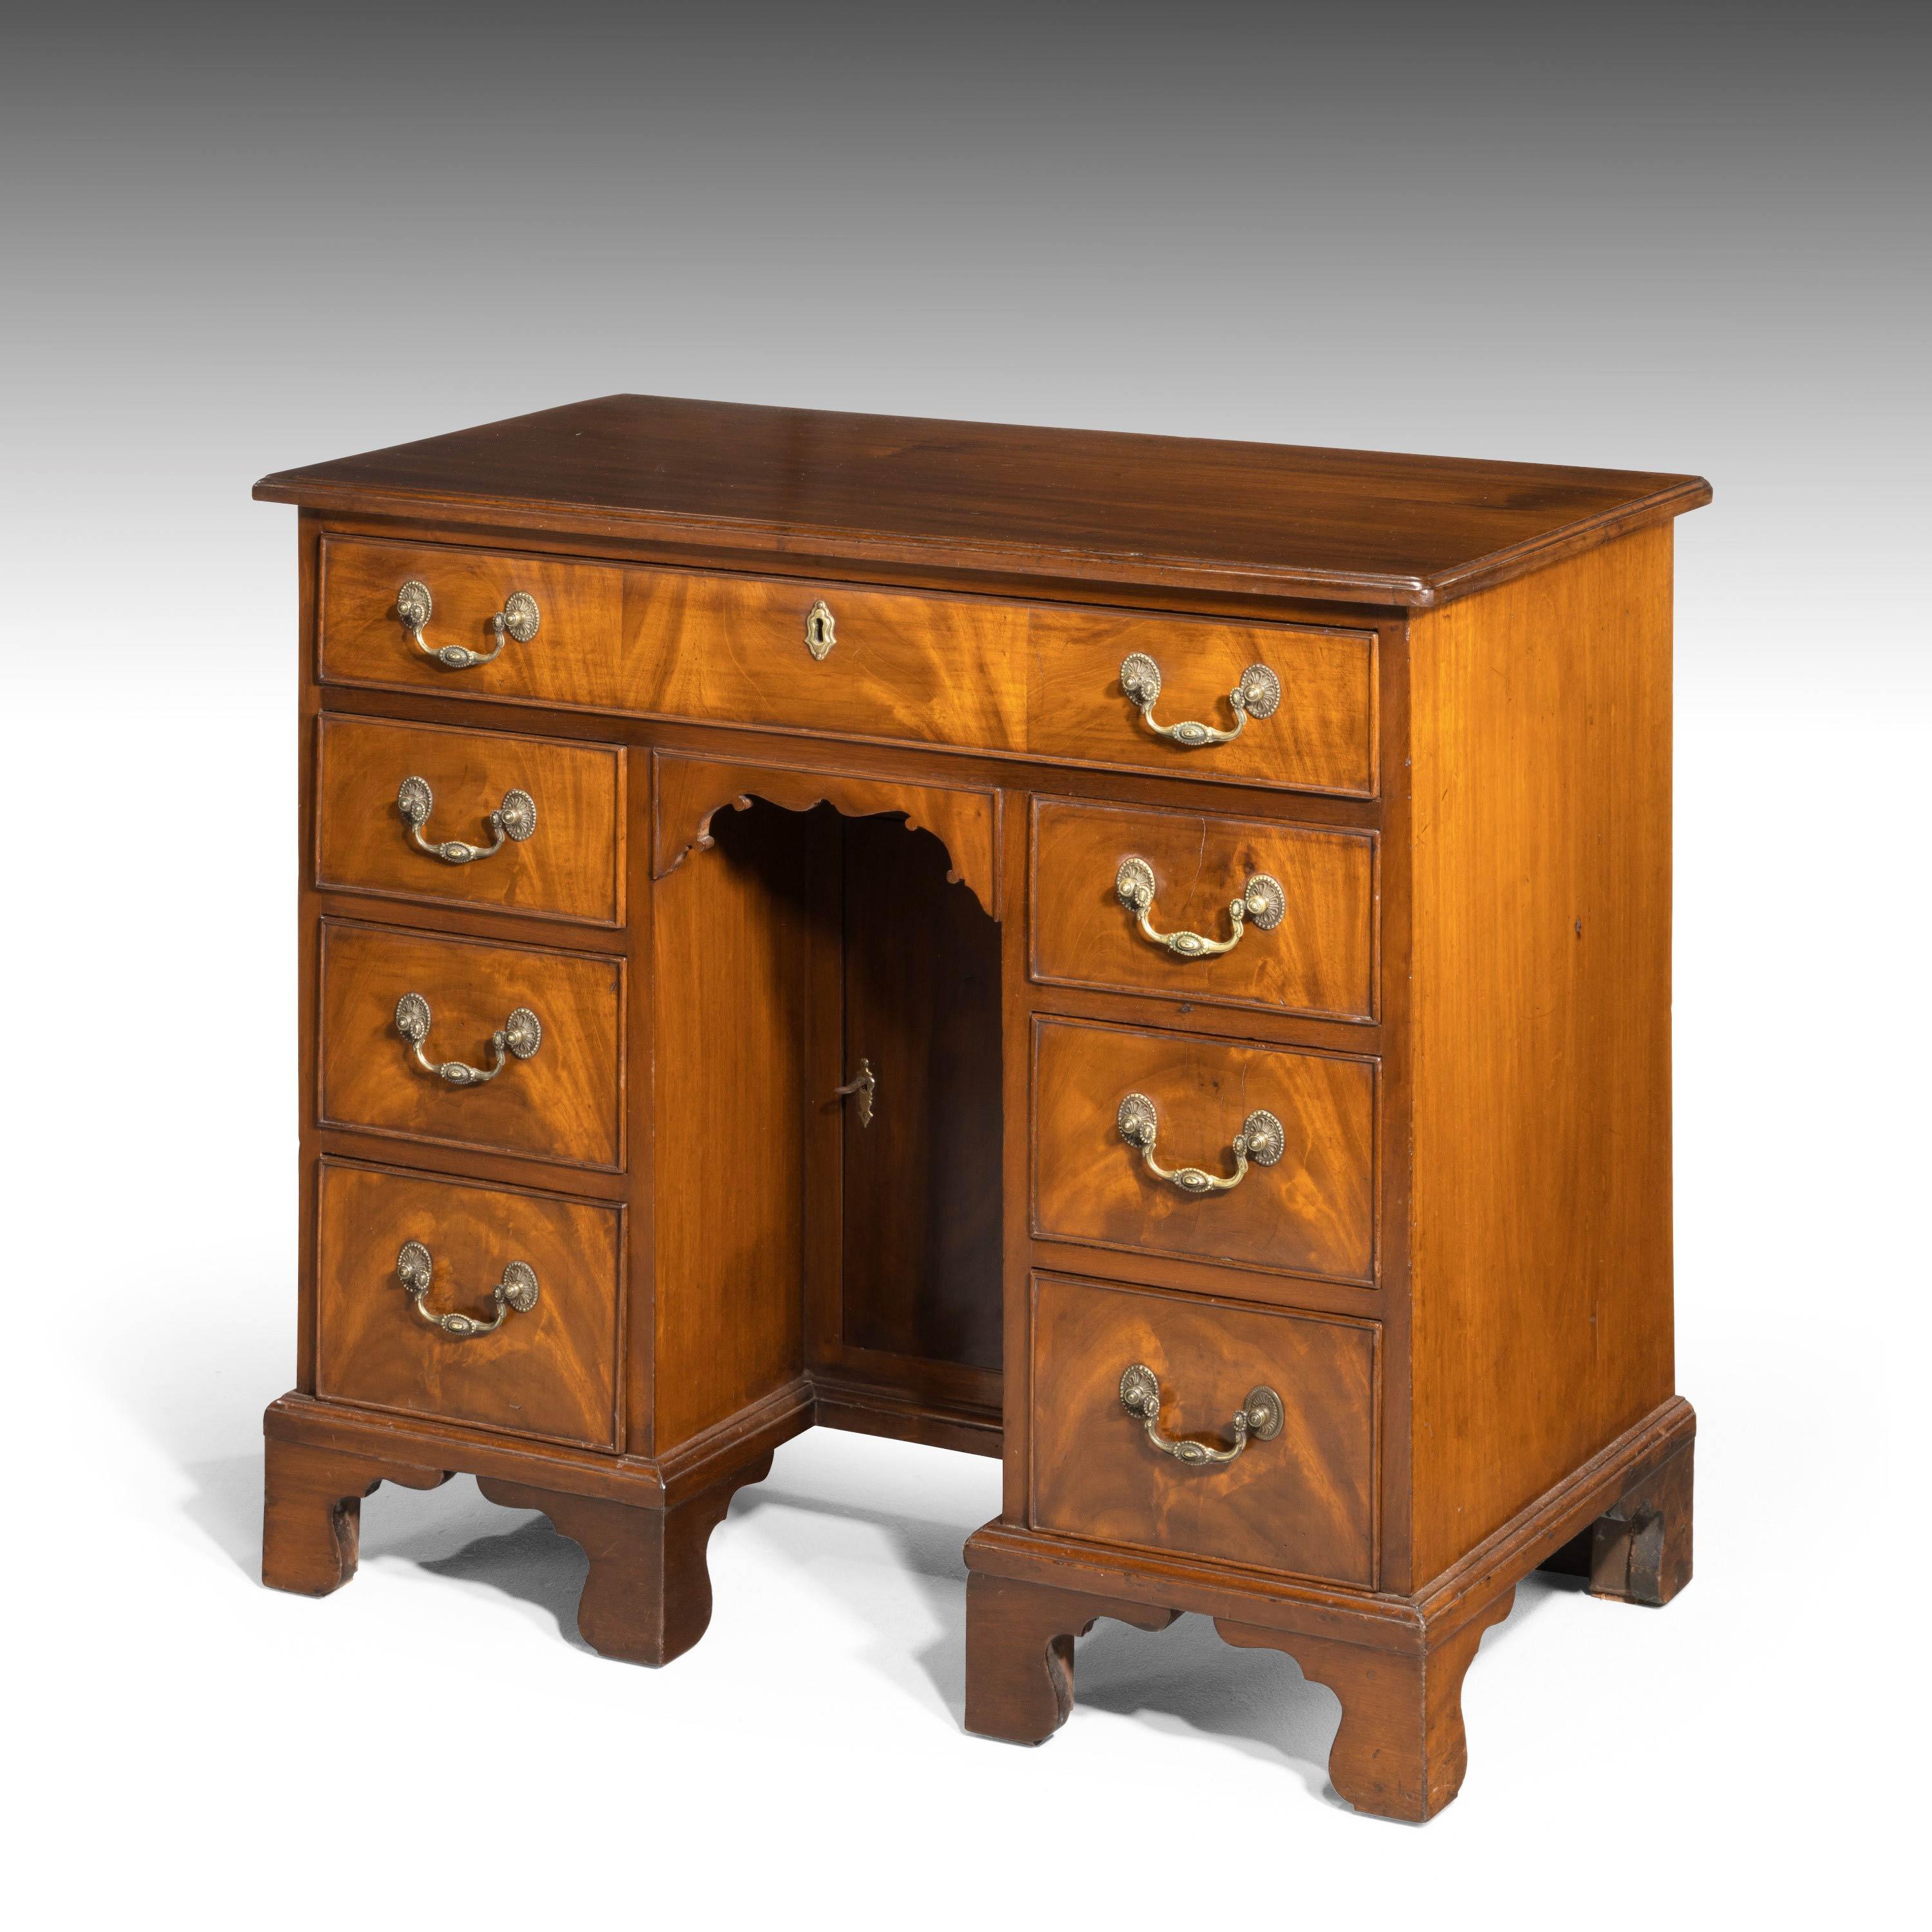 A George III period mahogany kneeholes desk of small proportions. With good original bracket feet and finely cast swan neck handles. With a central cupboard.
 